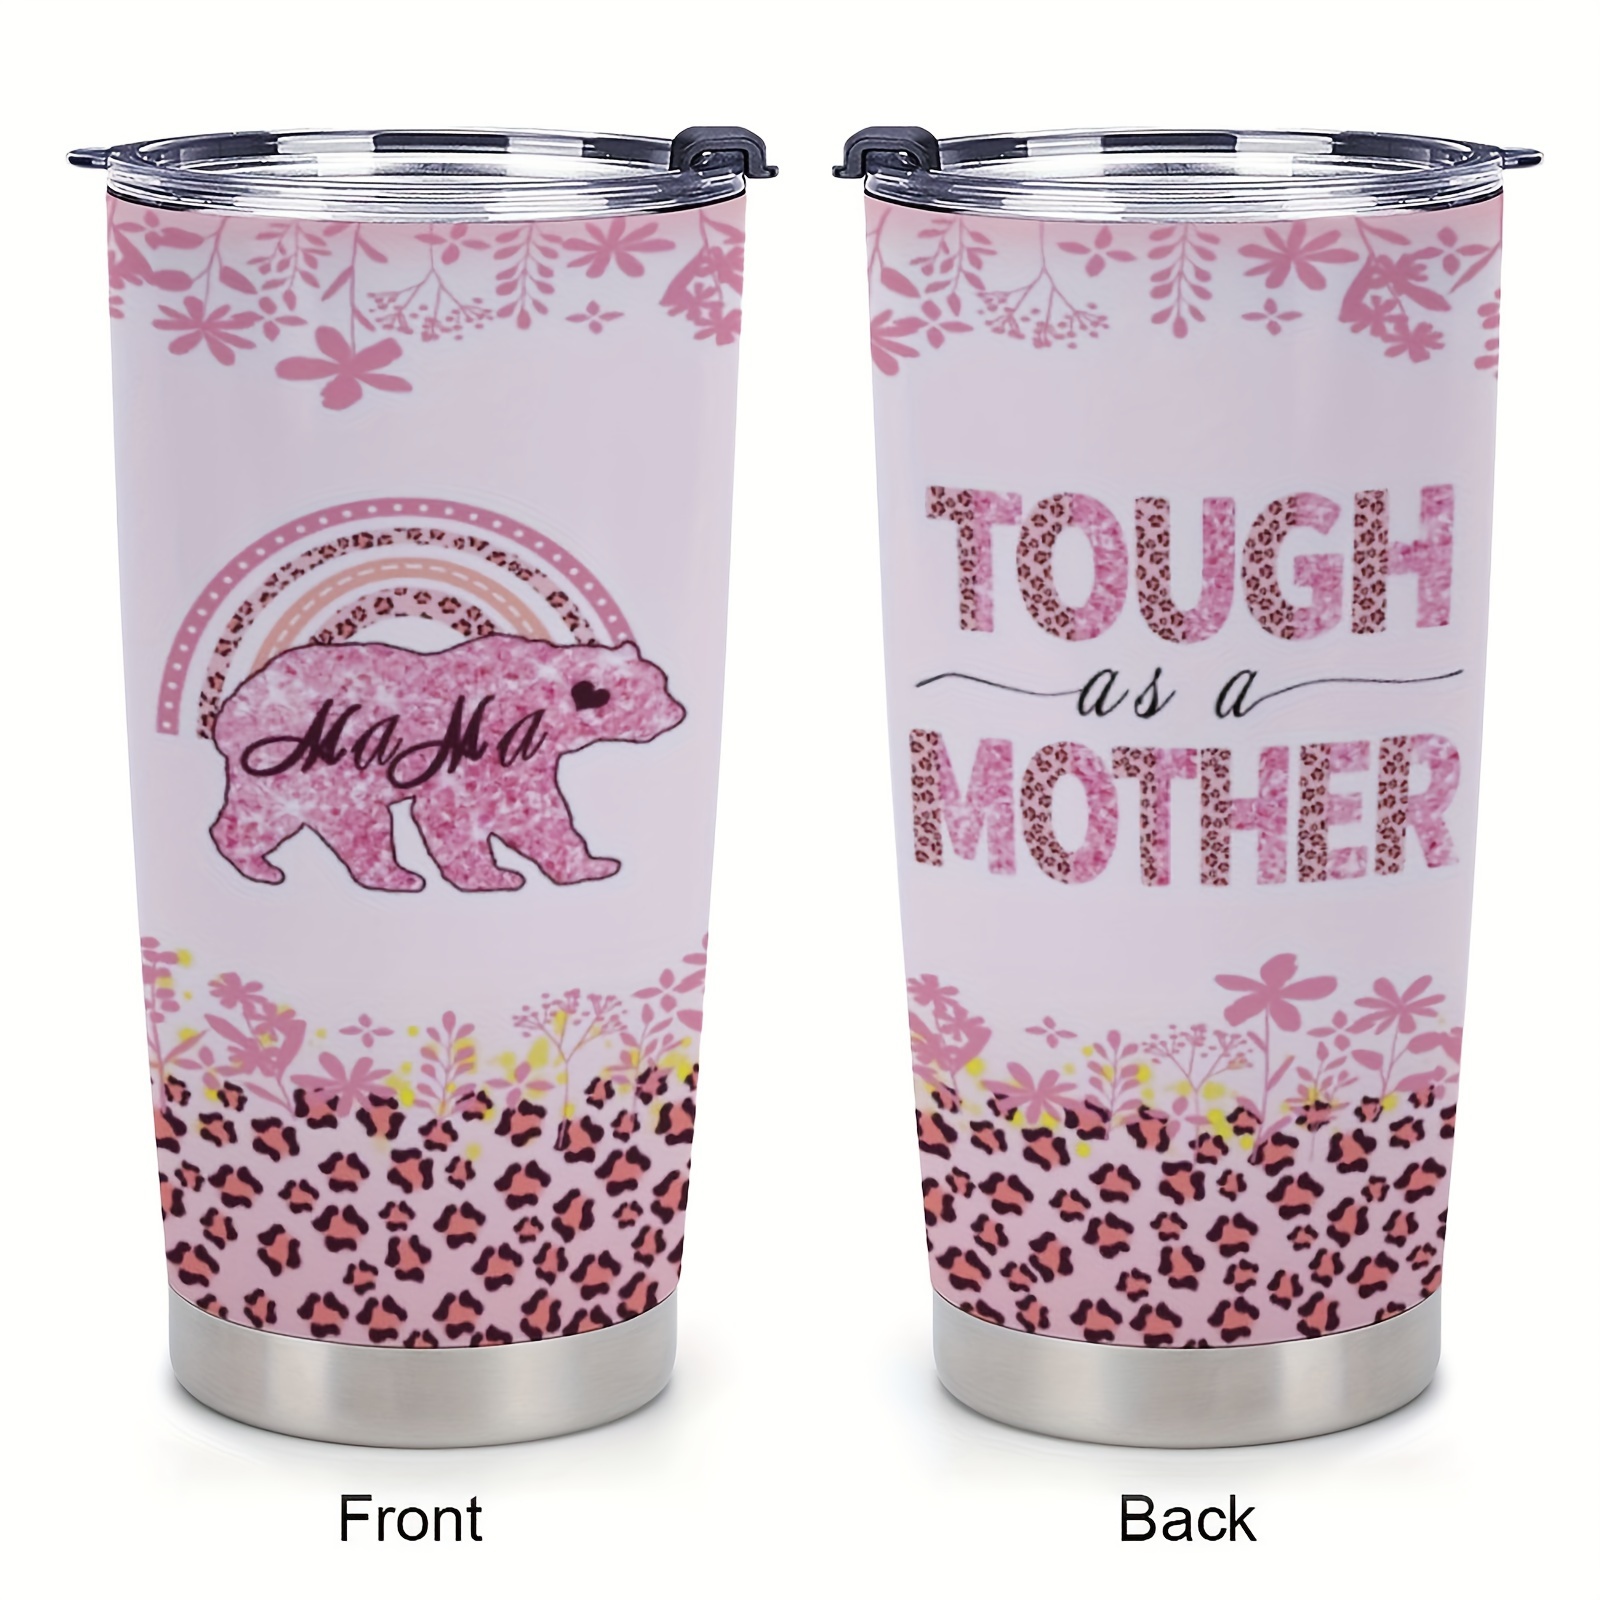 Mama - Tough As A Mother - Tumbler Cup - Gift For Mom